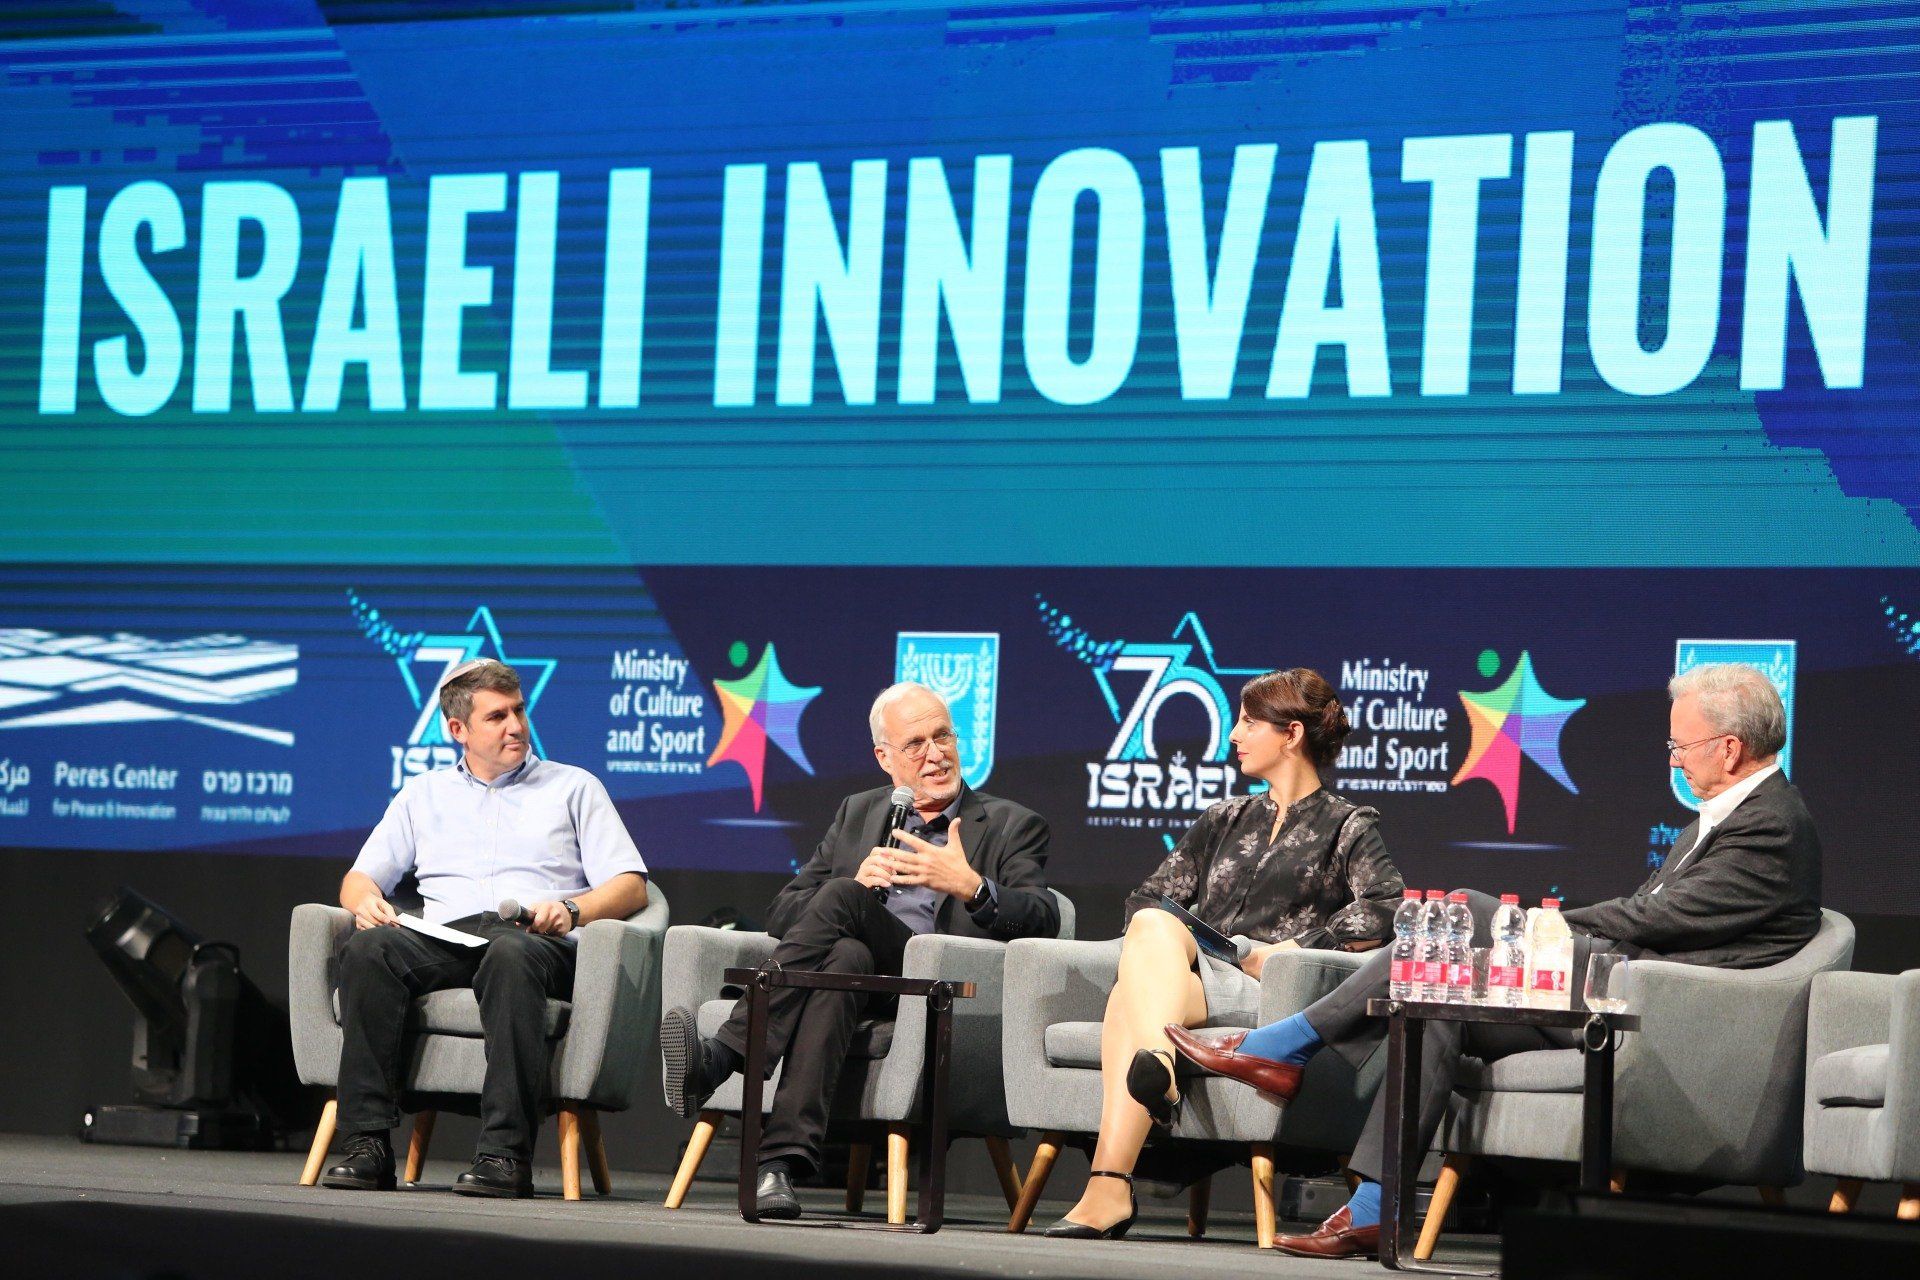 DouxMatok CEO, Eran Baniel, is discussing Israeli innovation for a better world with Eric Schmitt, former Executive Chairman of Google @Israeli innovation summit. As Eric Schmitt suggested, we will keep on innovating to hopefully allow all of us to enjoy life until the age of 200!